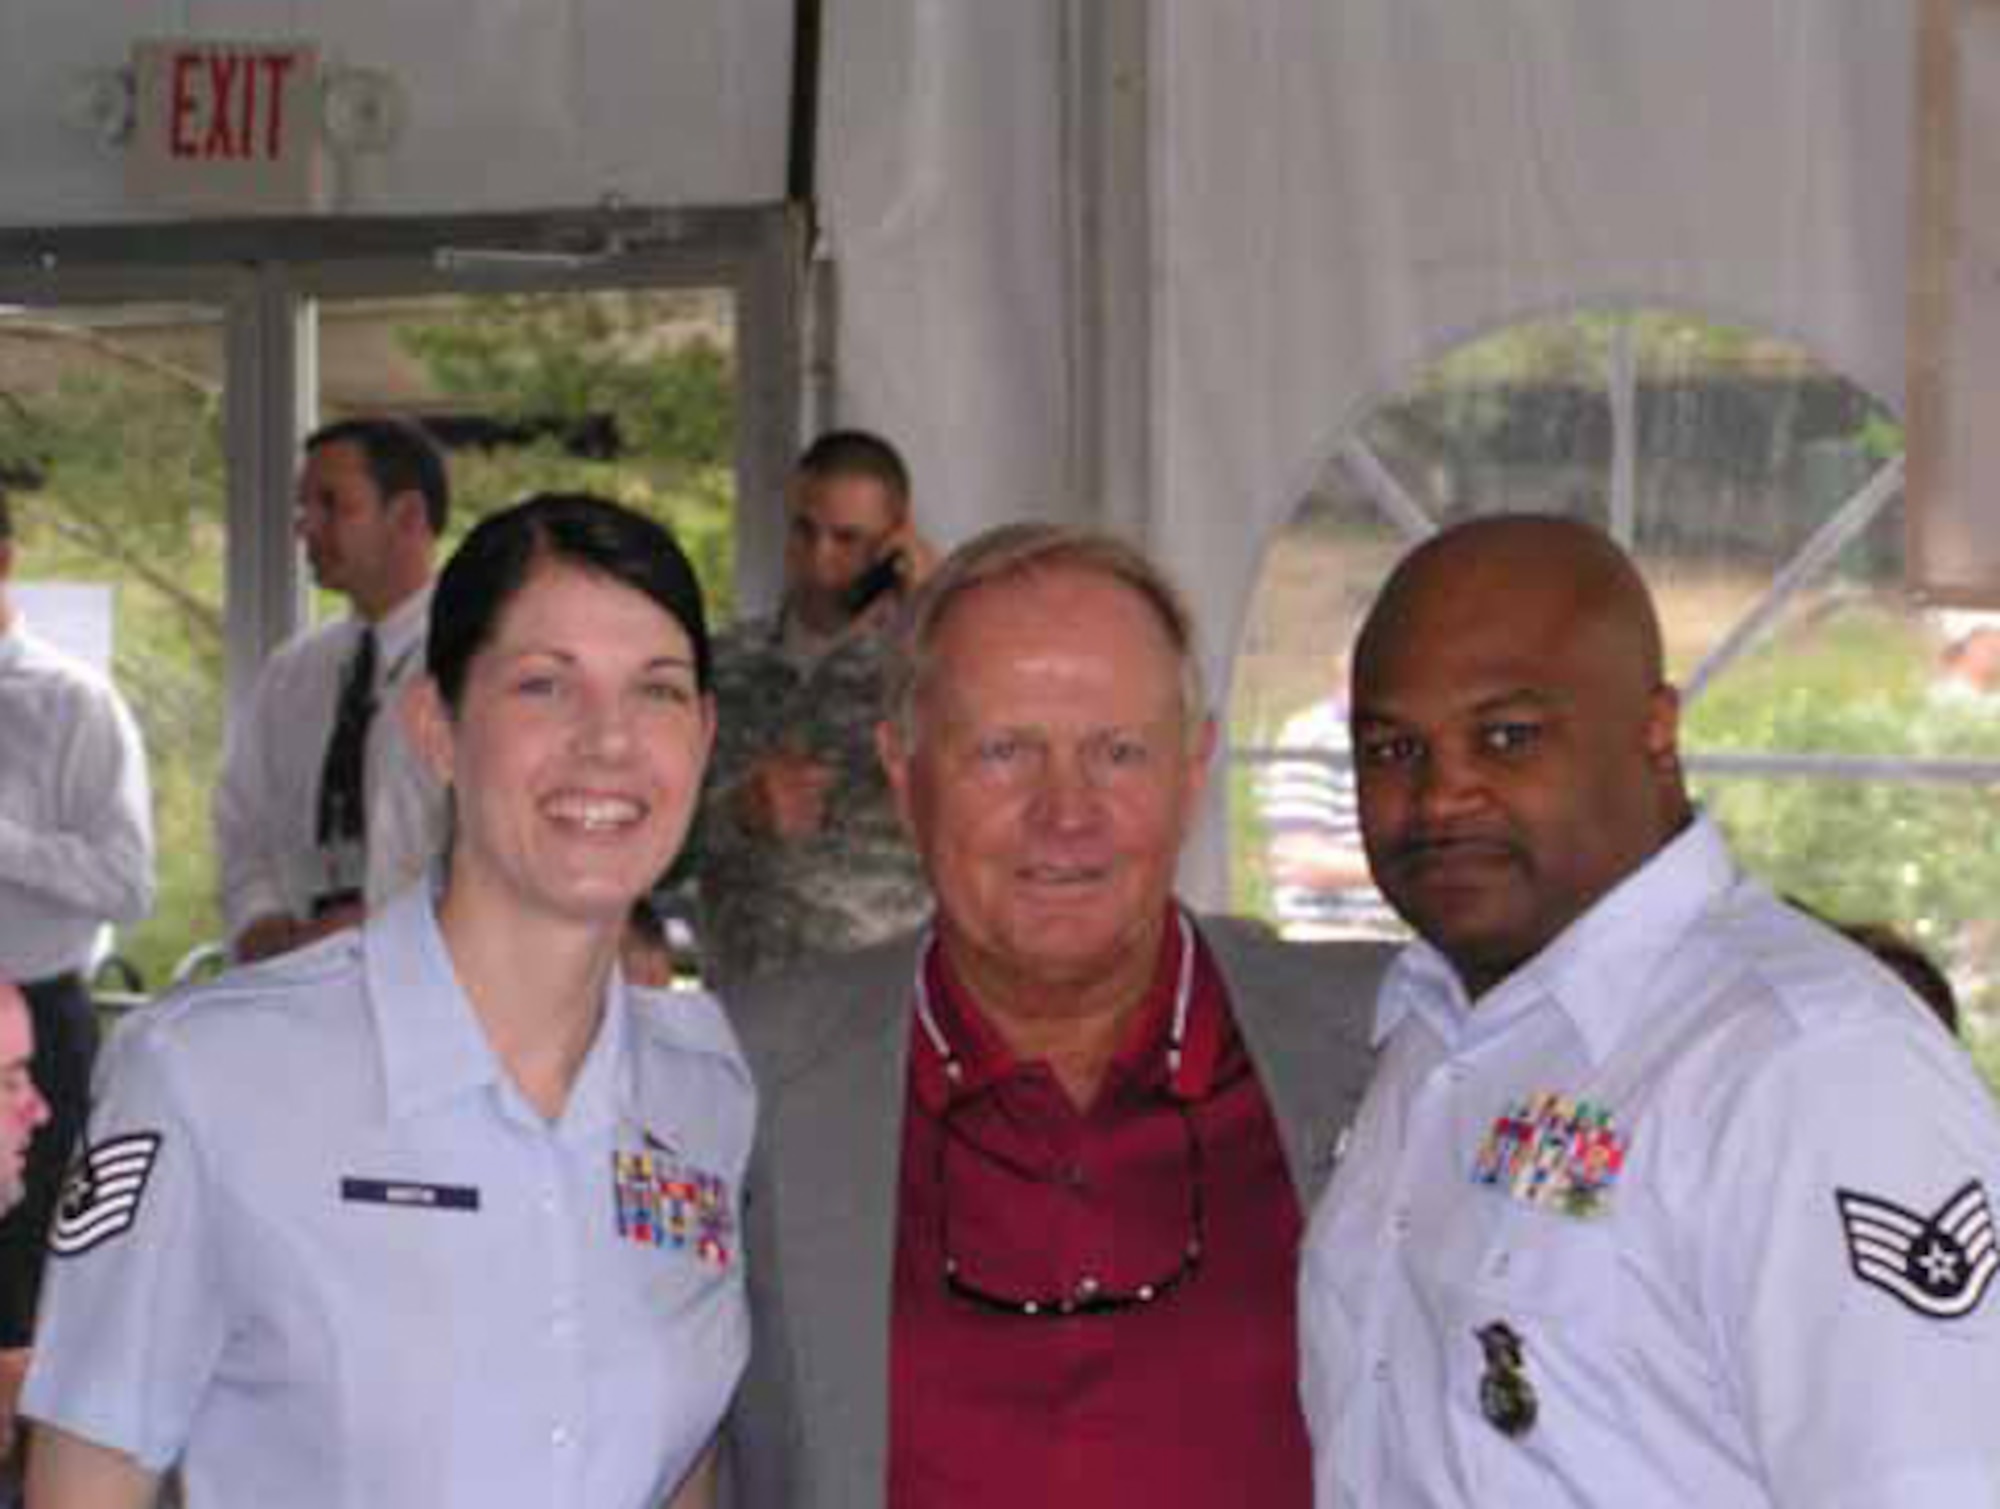 Tech. Sgt. Christine Martin from Finance, left, and Staff Sgt. Jeffrey Roberts,
right, from Security Forces Squadron were with golf legend Jack Nicklaus at
the 2008 Memorial Golf Tournament’s “Military Appreciation Day.